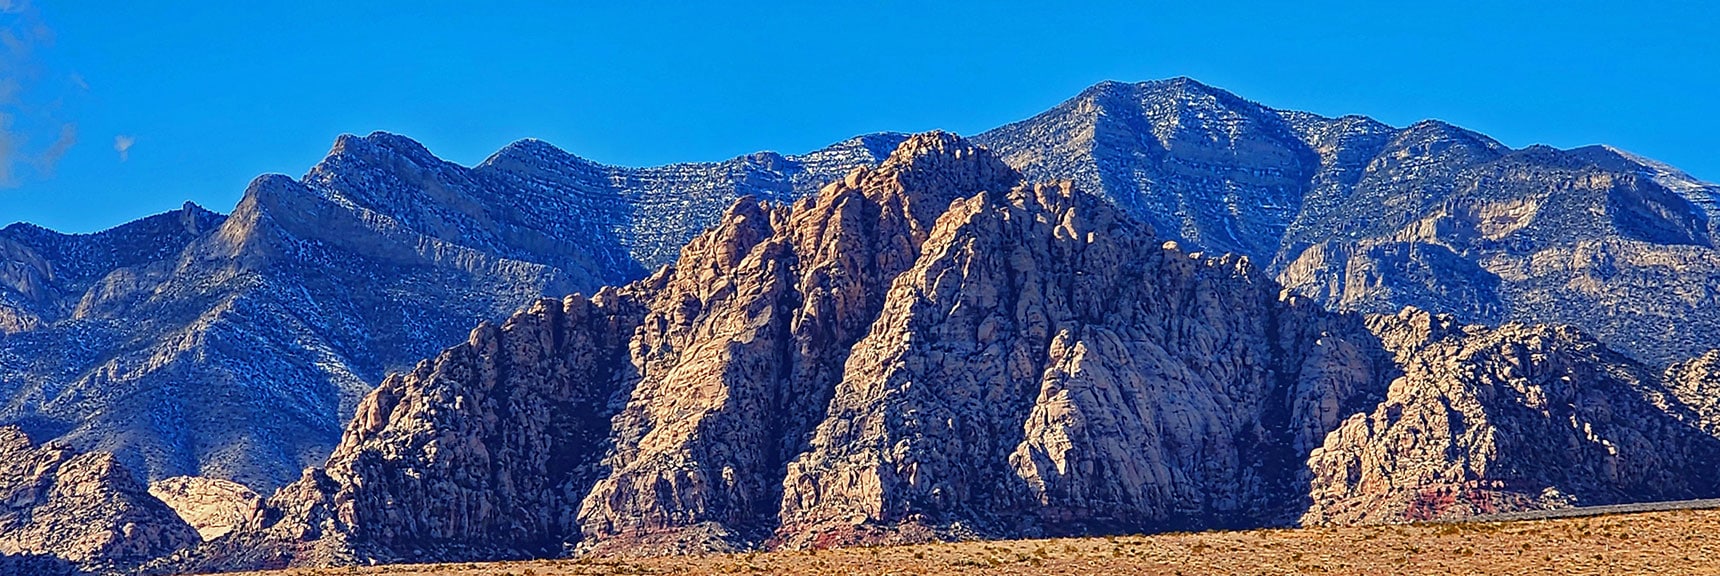 Larger View of White Rock Mountain. There's a Great 5-Mile Loop Trail Around the Mountain | Lower Calico Hills Loop | Calico Basin & Red Rock Canyon, Nevada